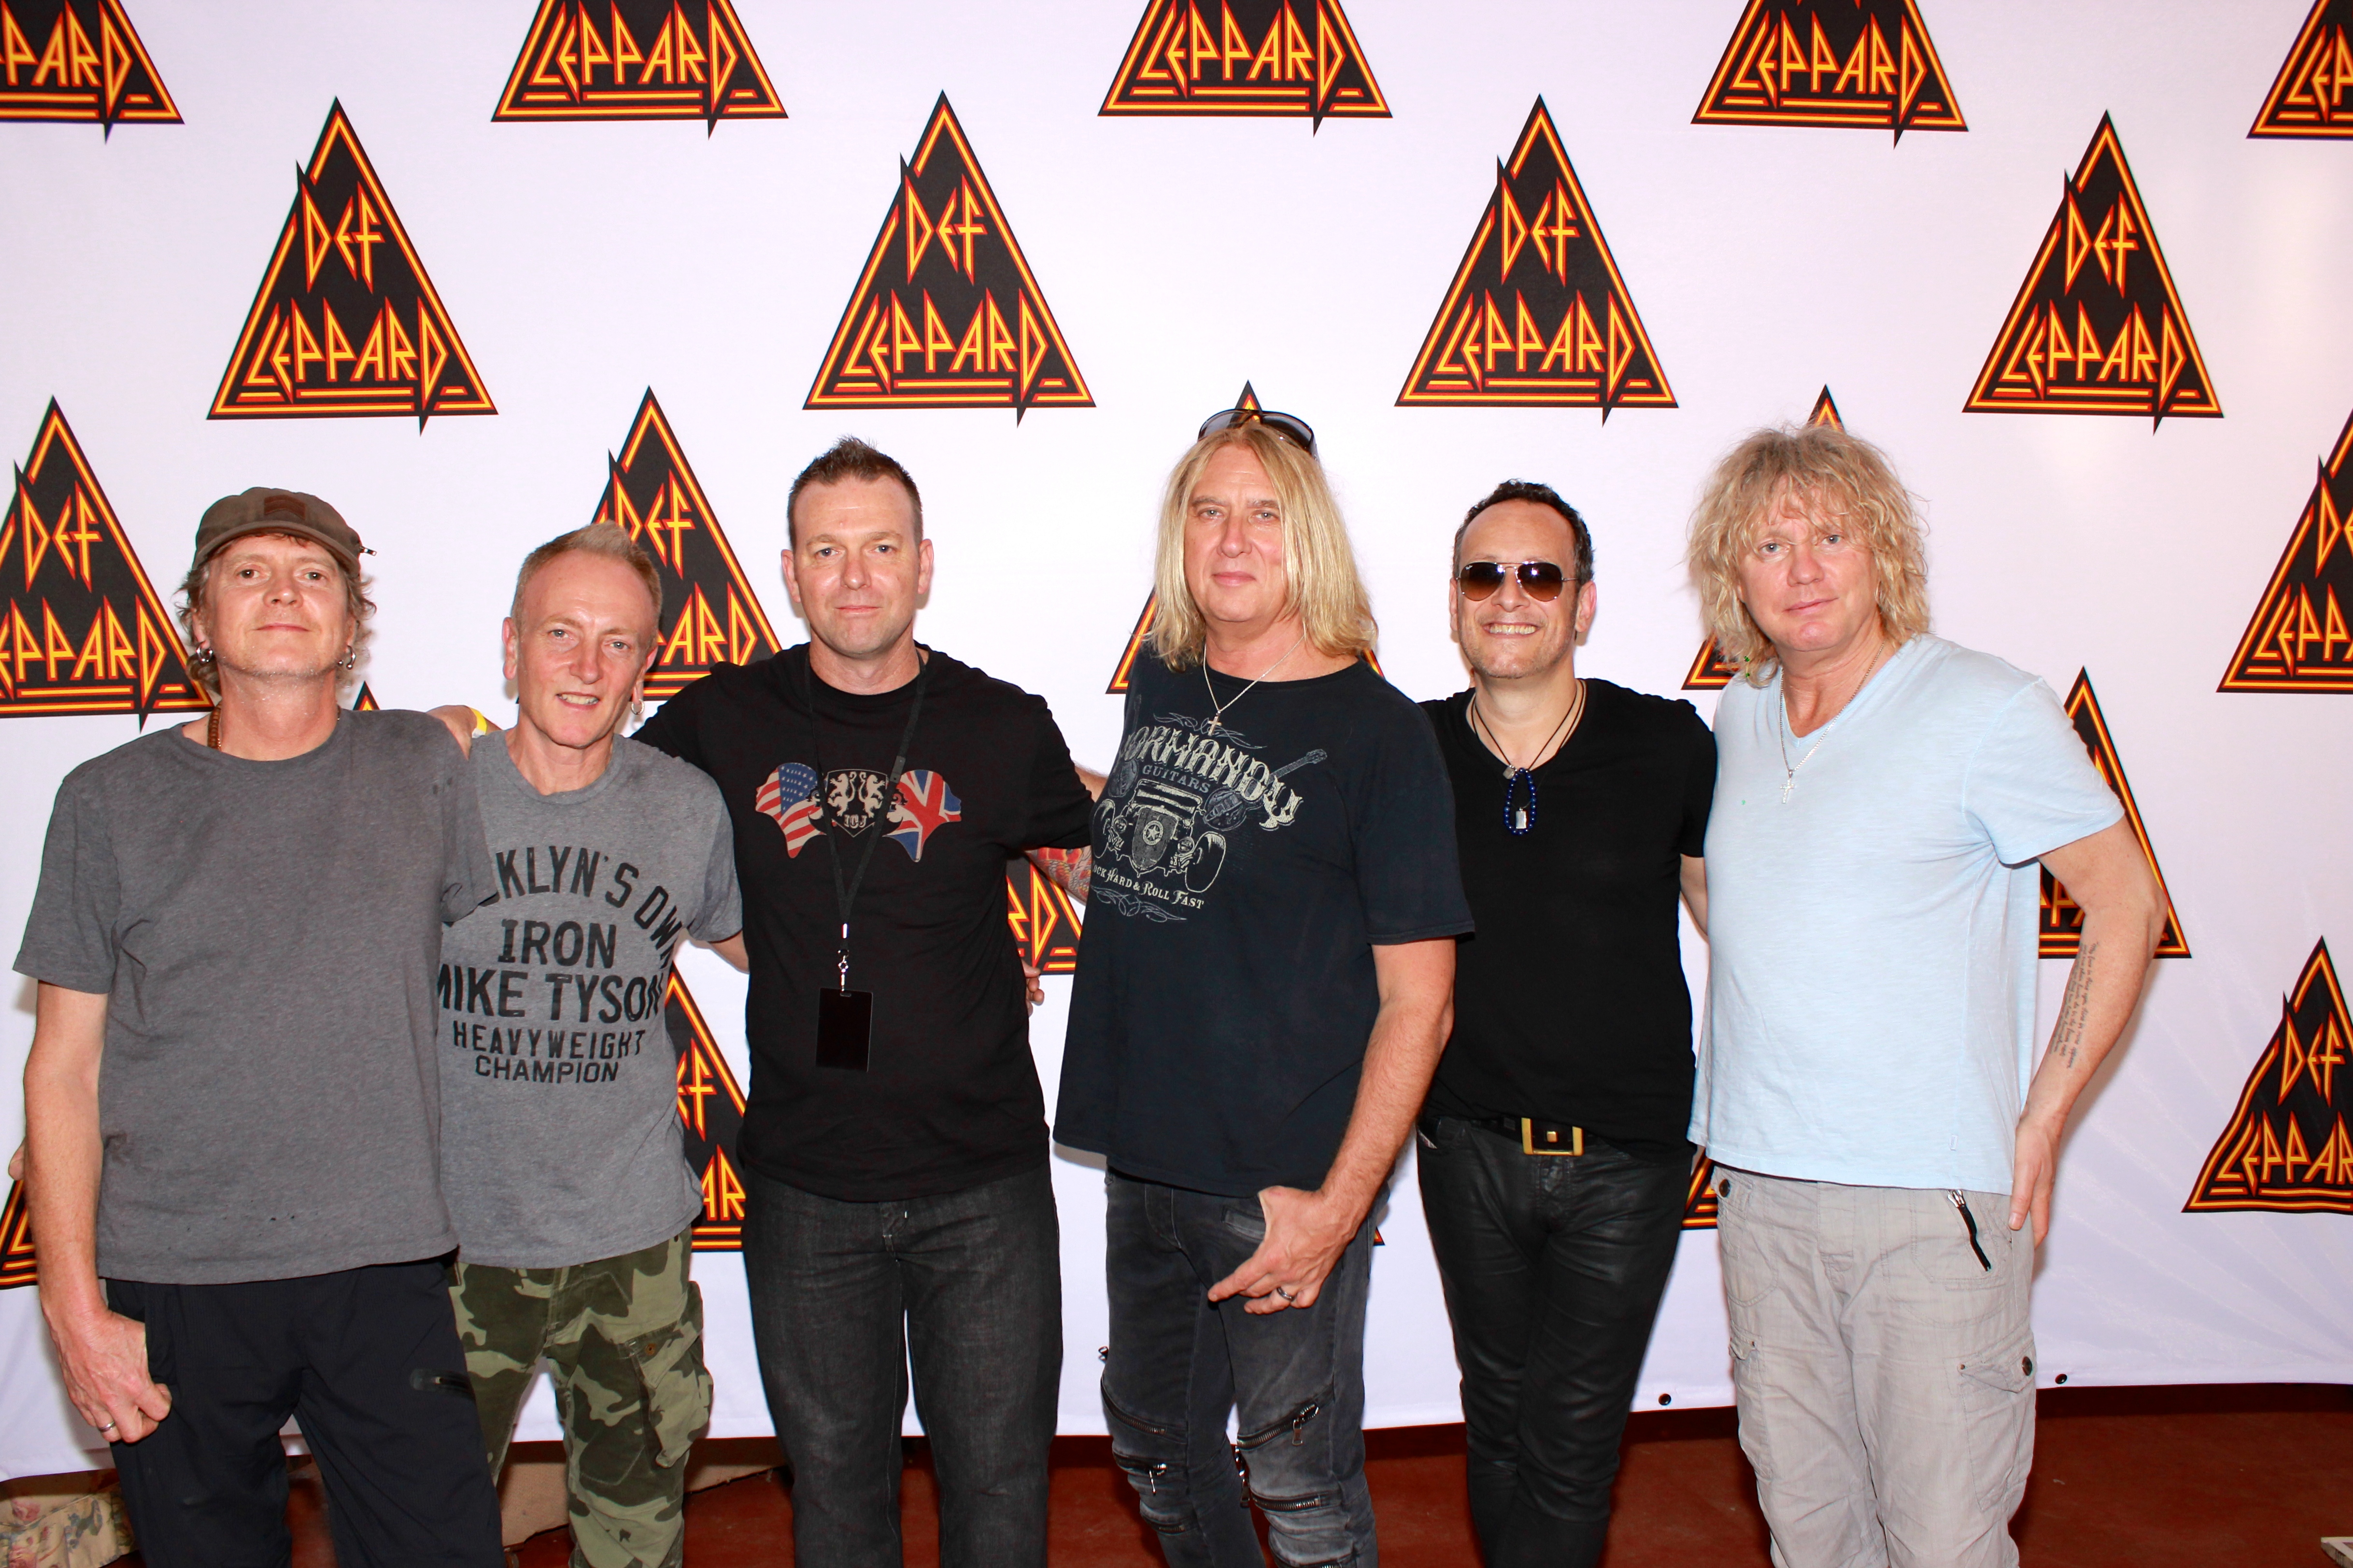 Sean Follows - Meet & Greet with Def Leppard, Sean is wearing the Classic Union Jane design. 21 November 2015. Perth, Western Australia. "Still one of my favourite shirts and one of the first ever purchased" 